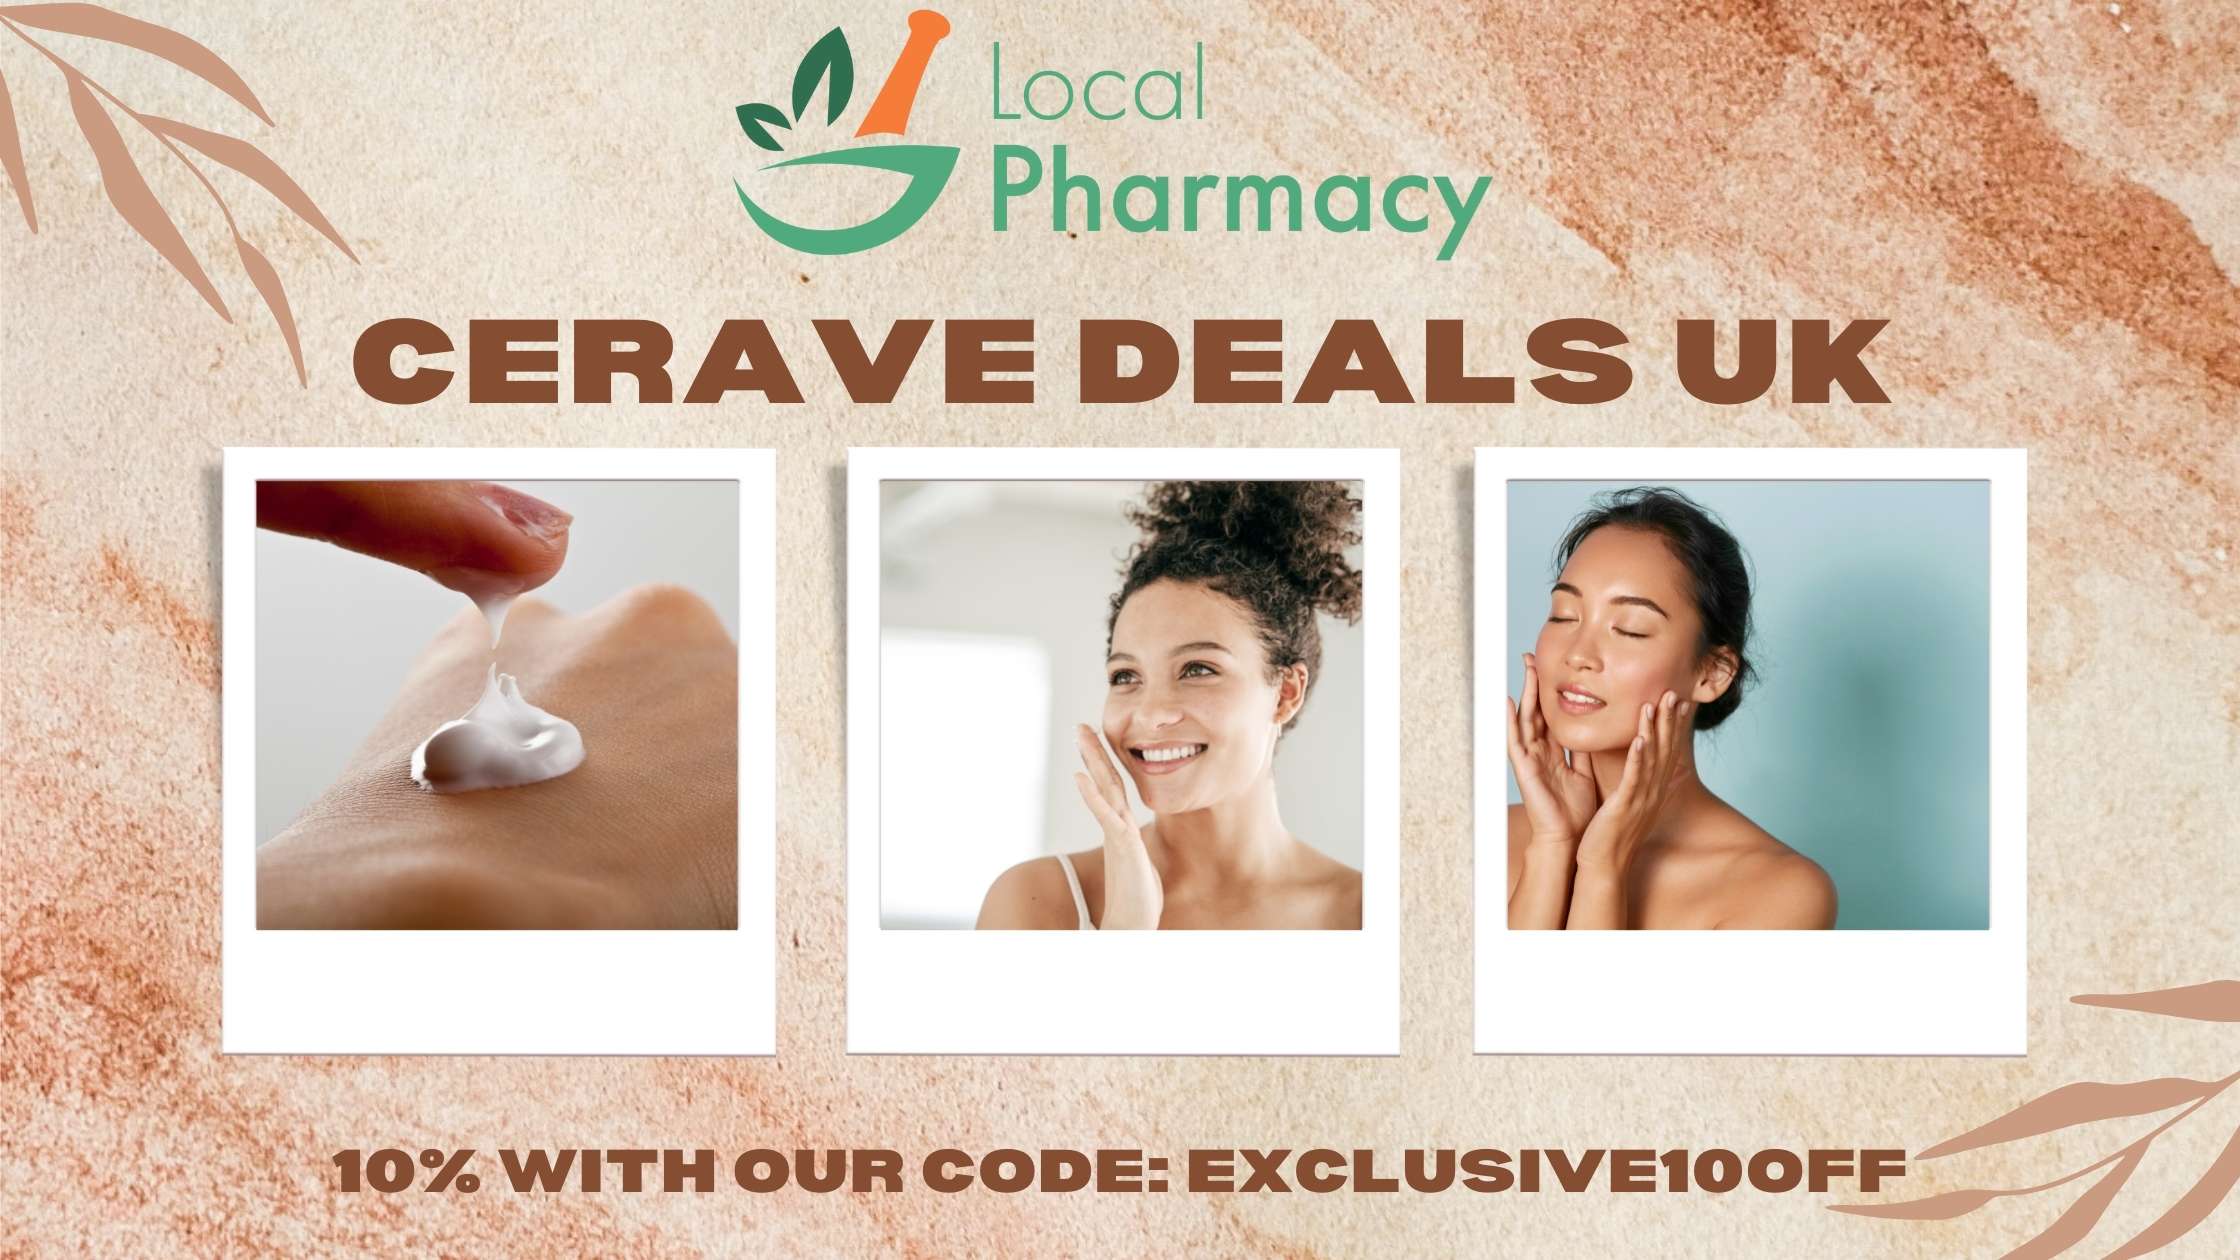 Cerave coupon code and deals uk